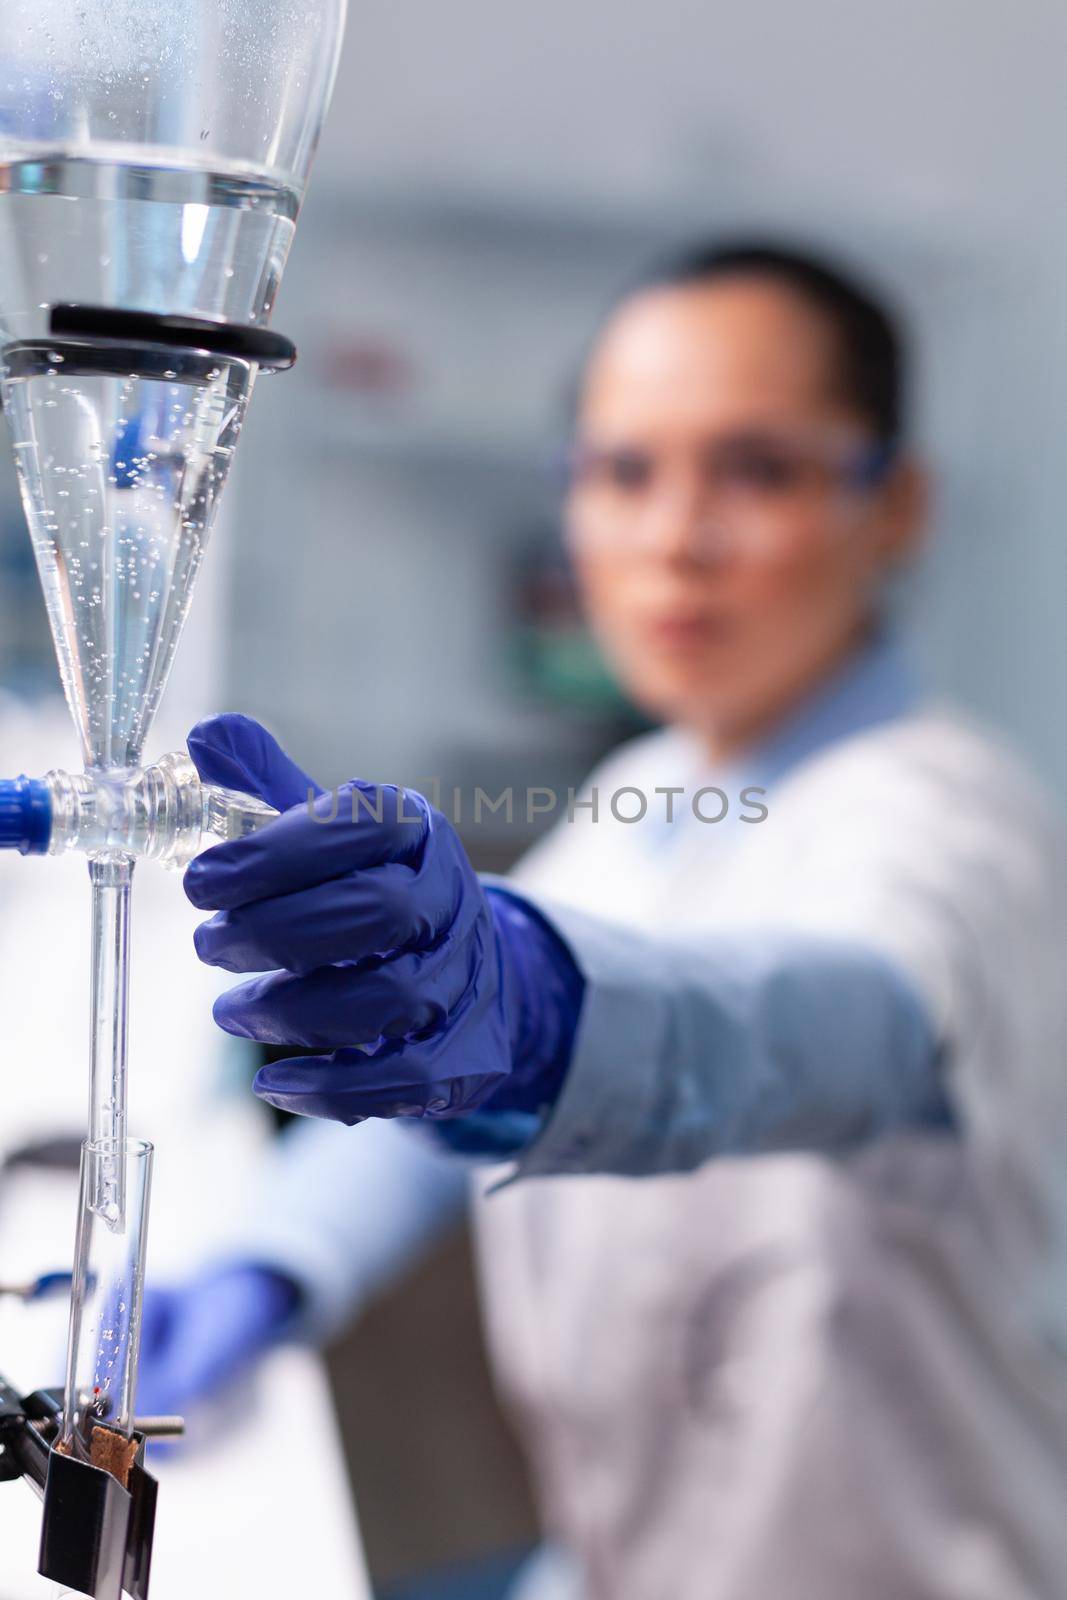 Specialist chemist woman working at biochemistry experiment using professional biology tools examining scientific chemistry research. Microbiologist doctor standing in hospital laboratory